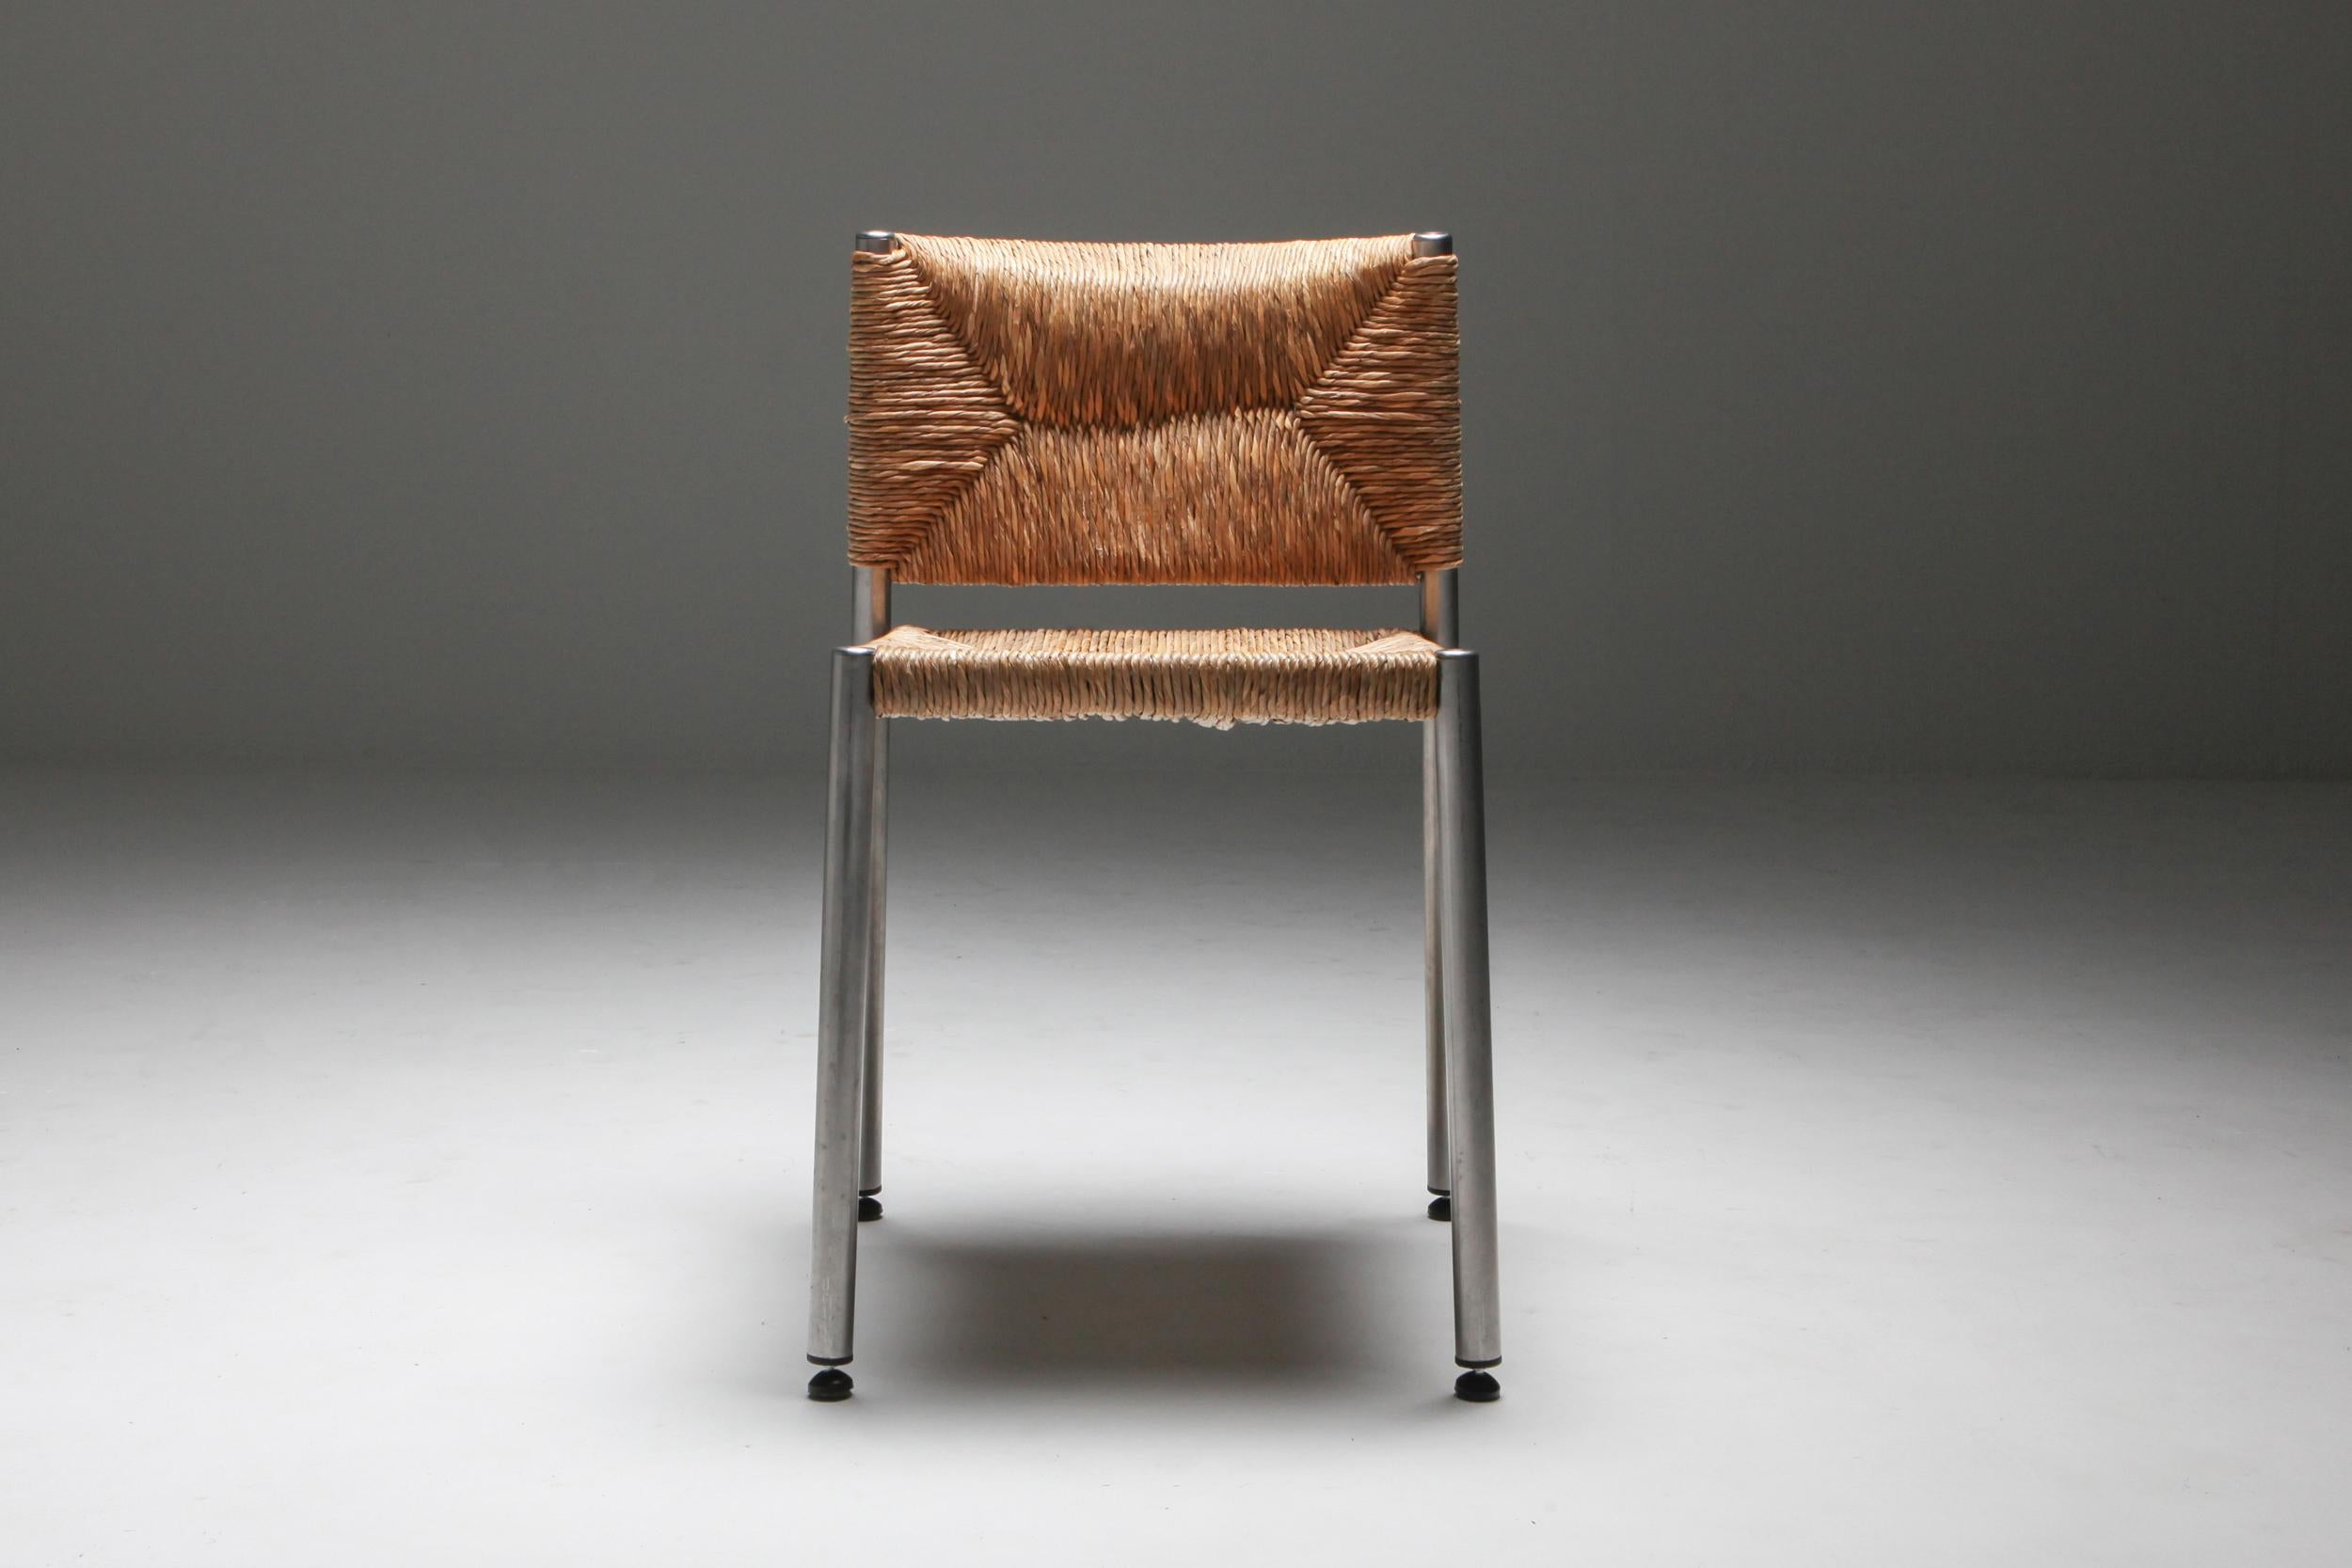 20th Century Contemporary Rustic Modern Chairs in Seagrass and Aluminum